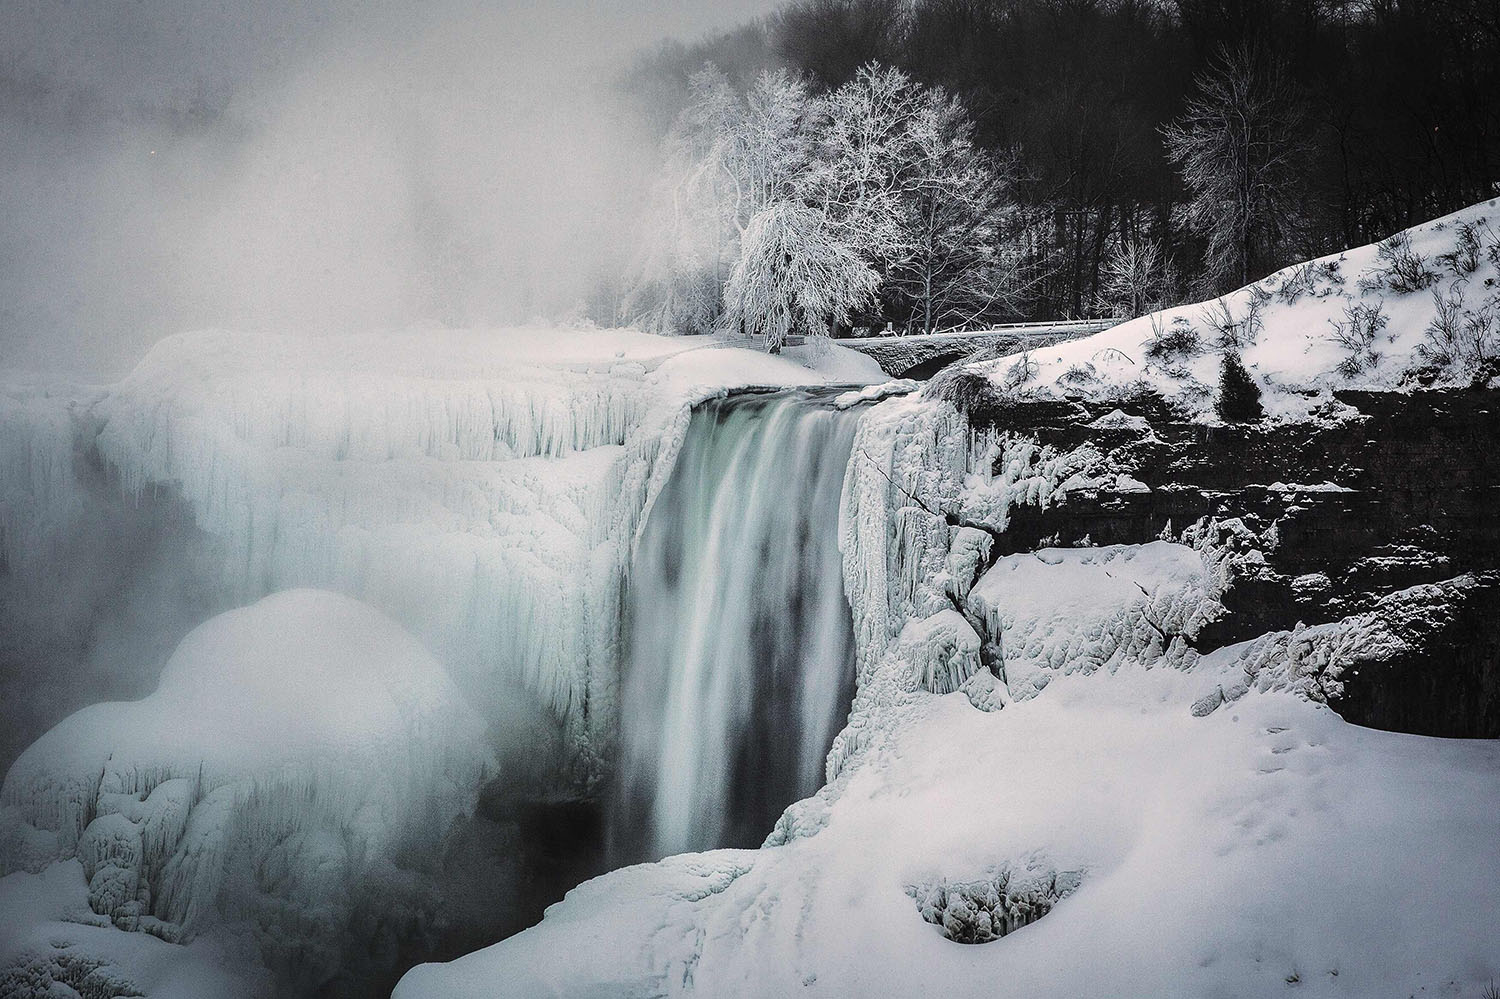 A partially frozen Niagara Falls is seen on the American side during sub freezing temperatures in Niagara Falls